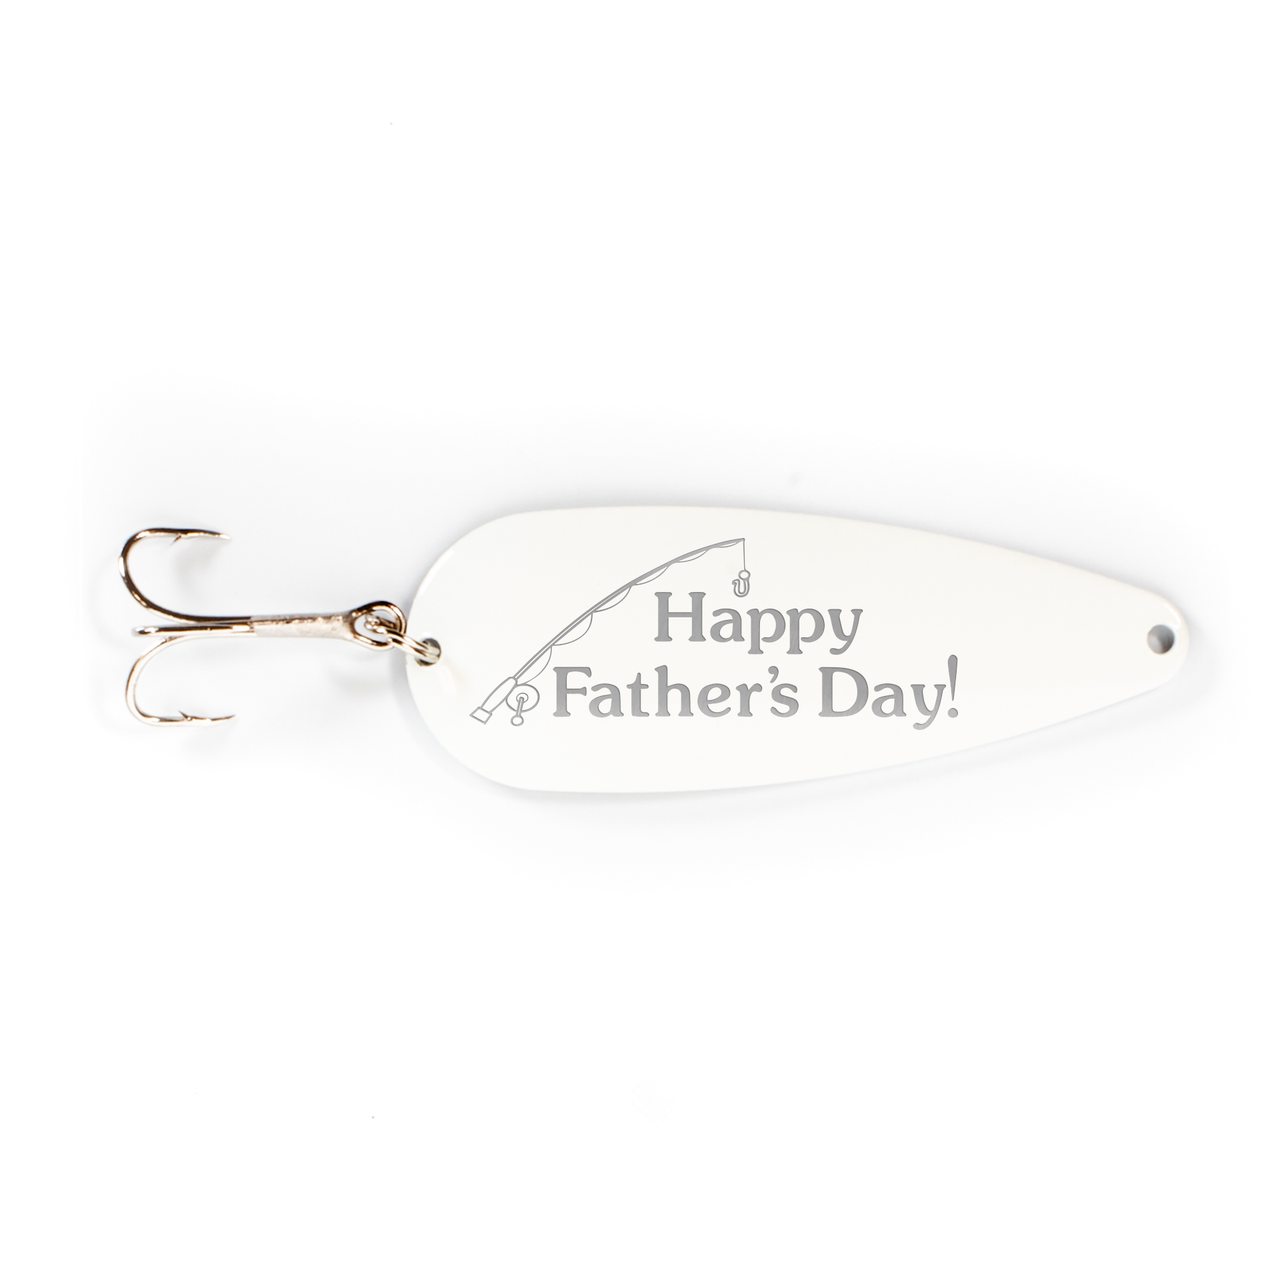 Happy Father's Day! Fishing Lure - Baum Designs